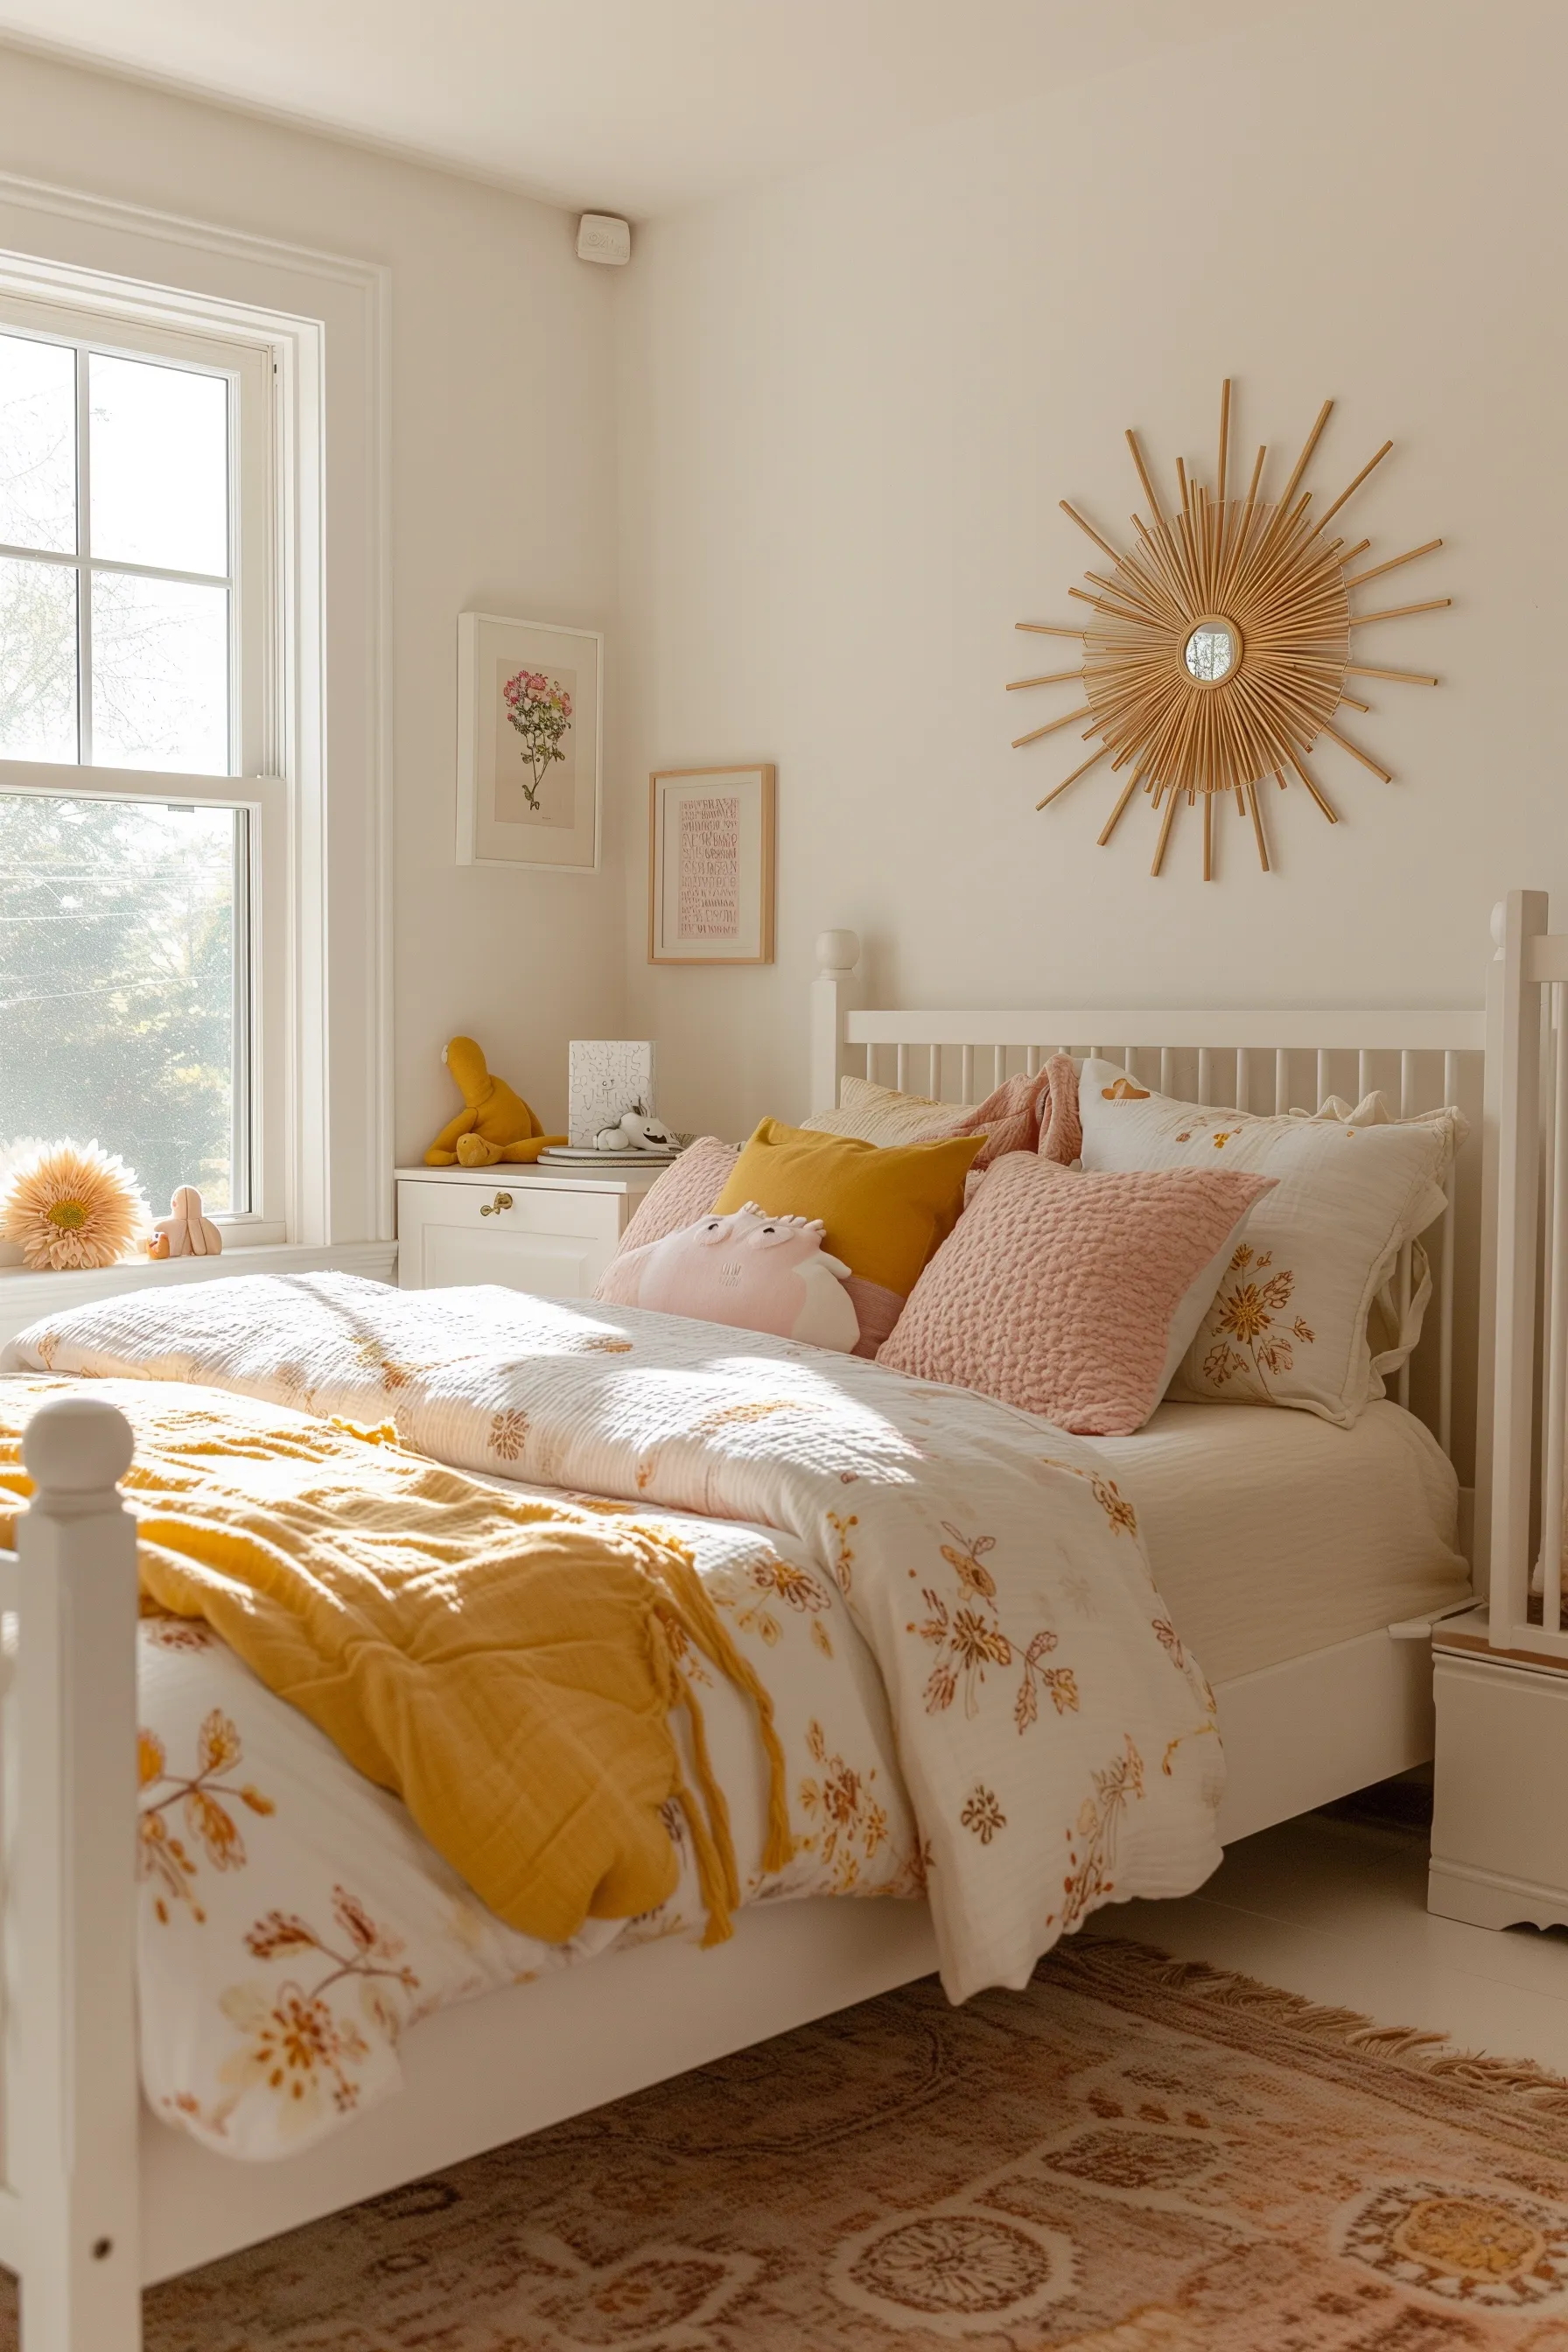 Orange and white floral bedding on a white bed